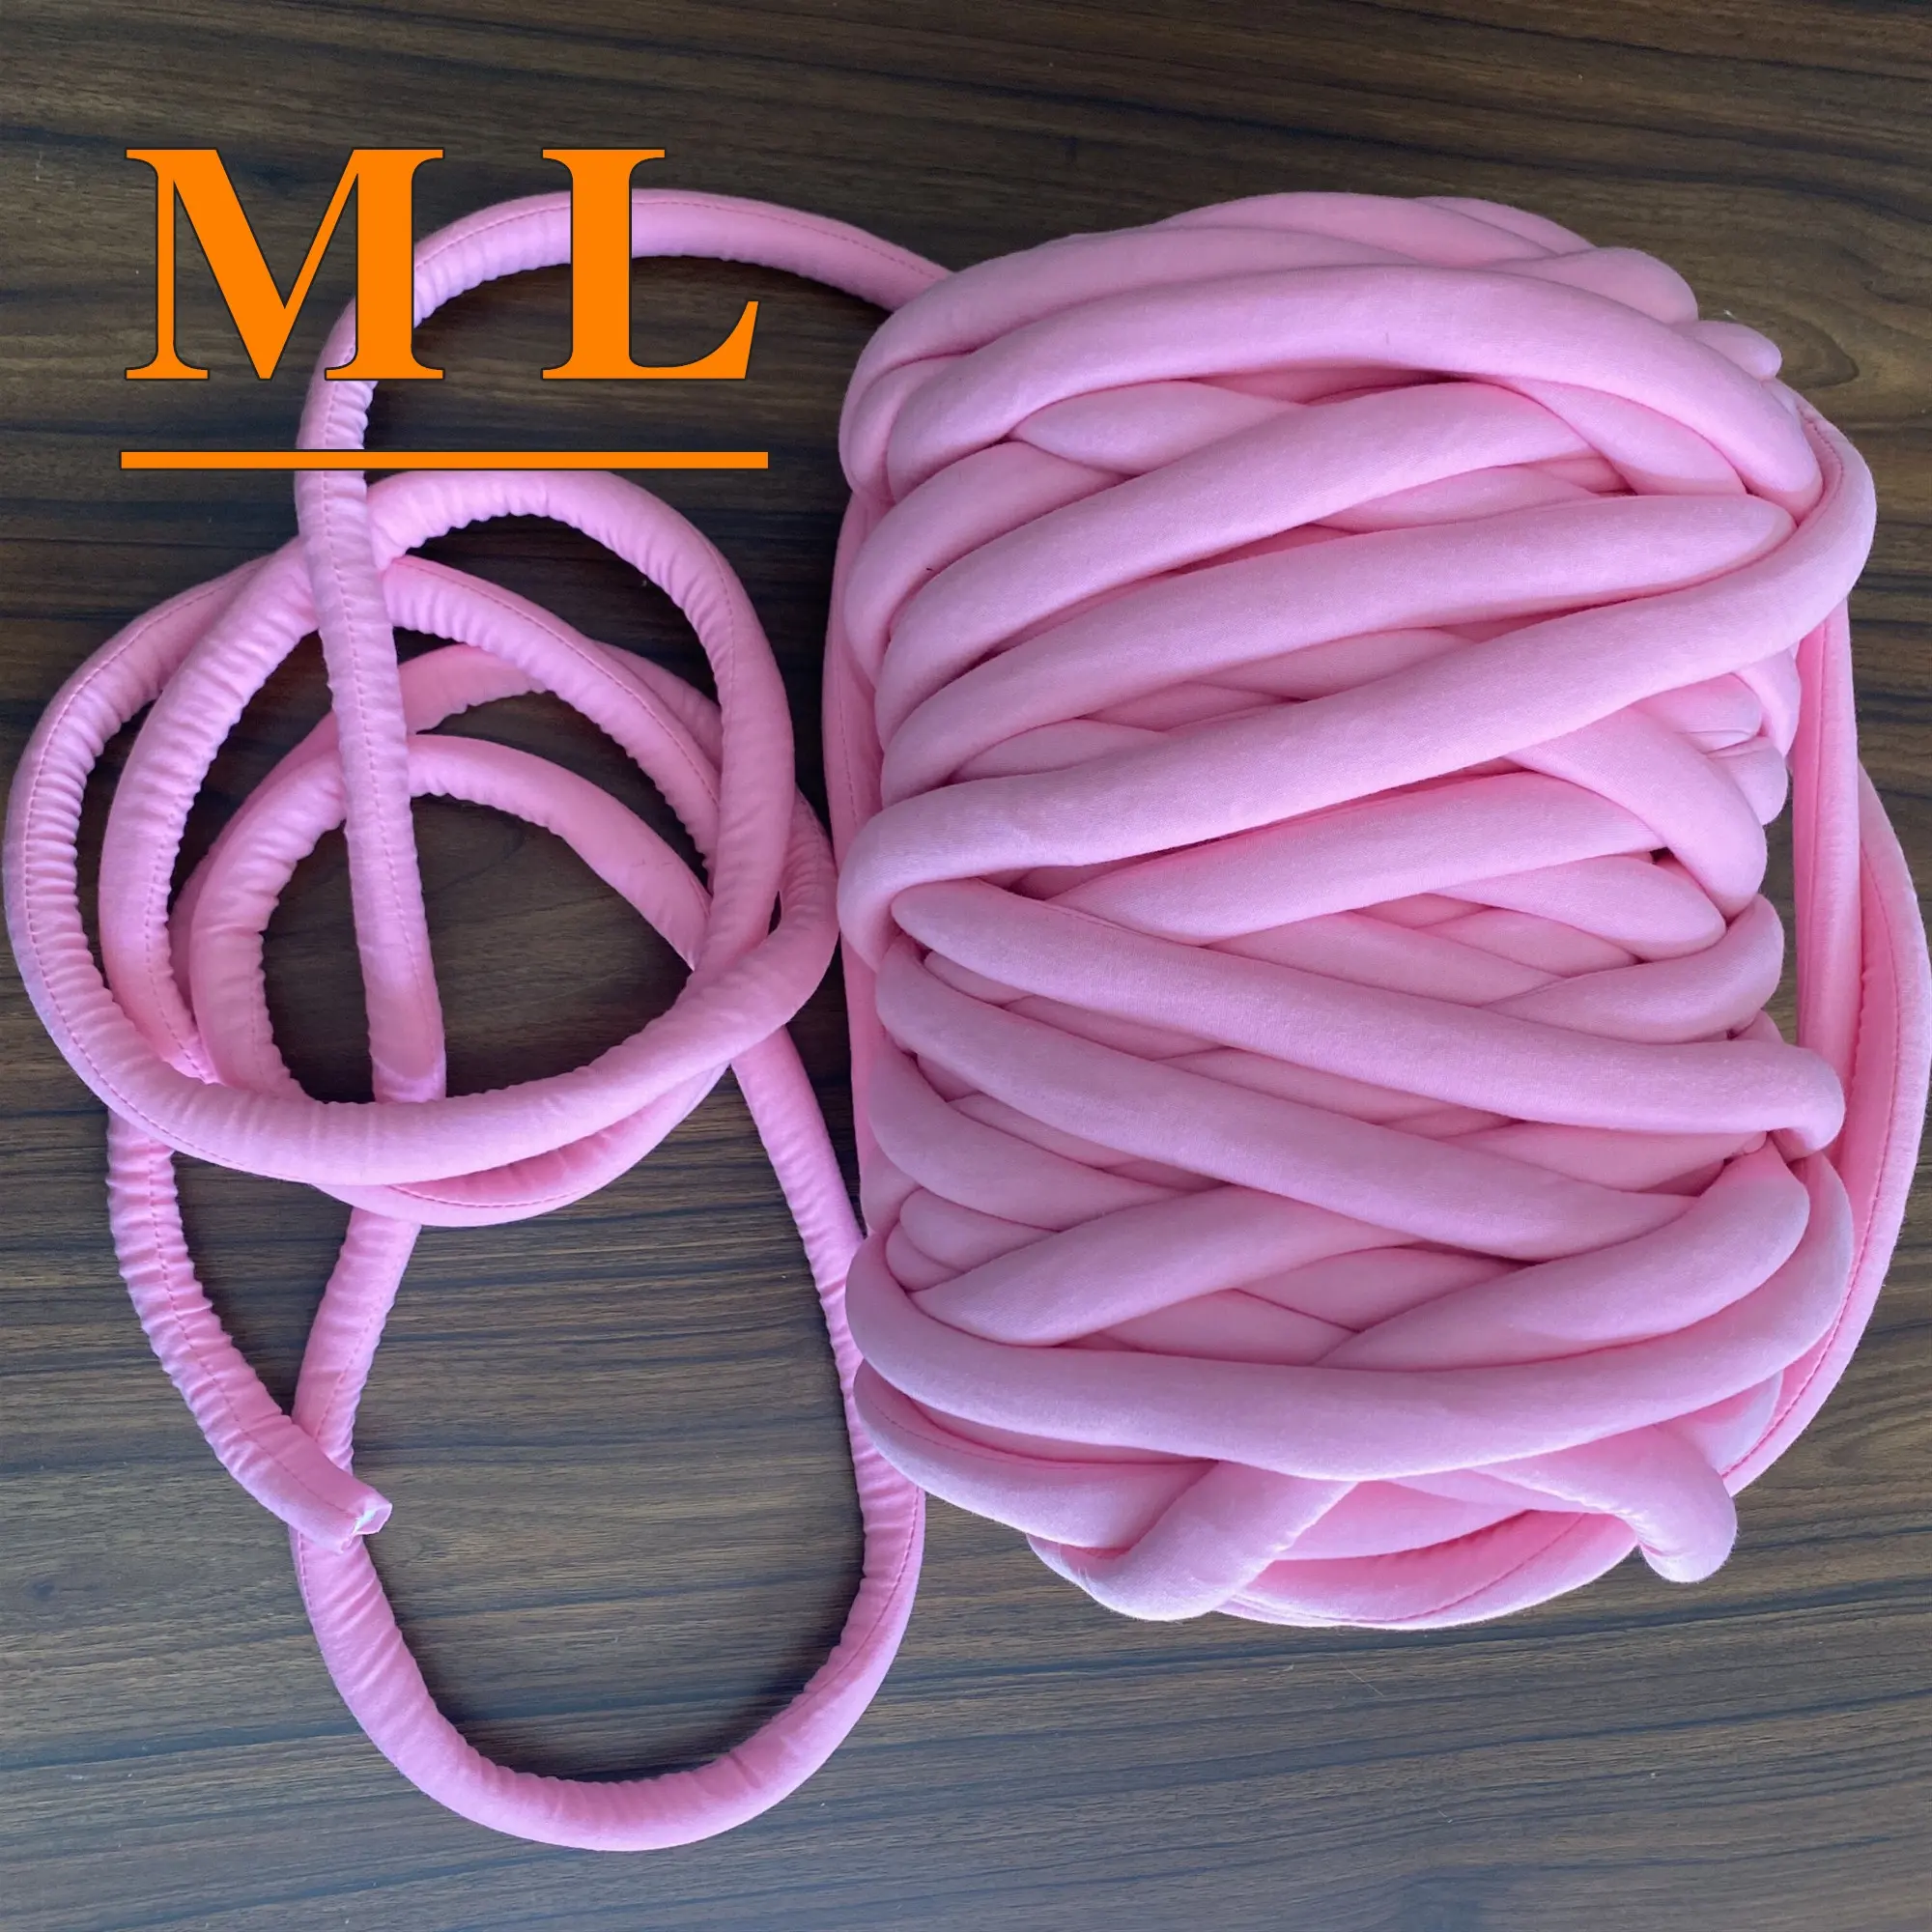 Polyester Hollow Giant Chunky Cotton Tube Yarn For Hand Knitting